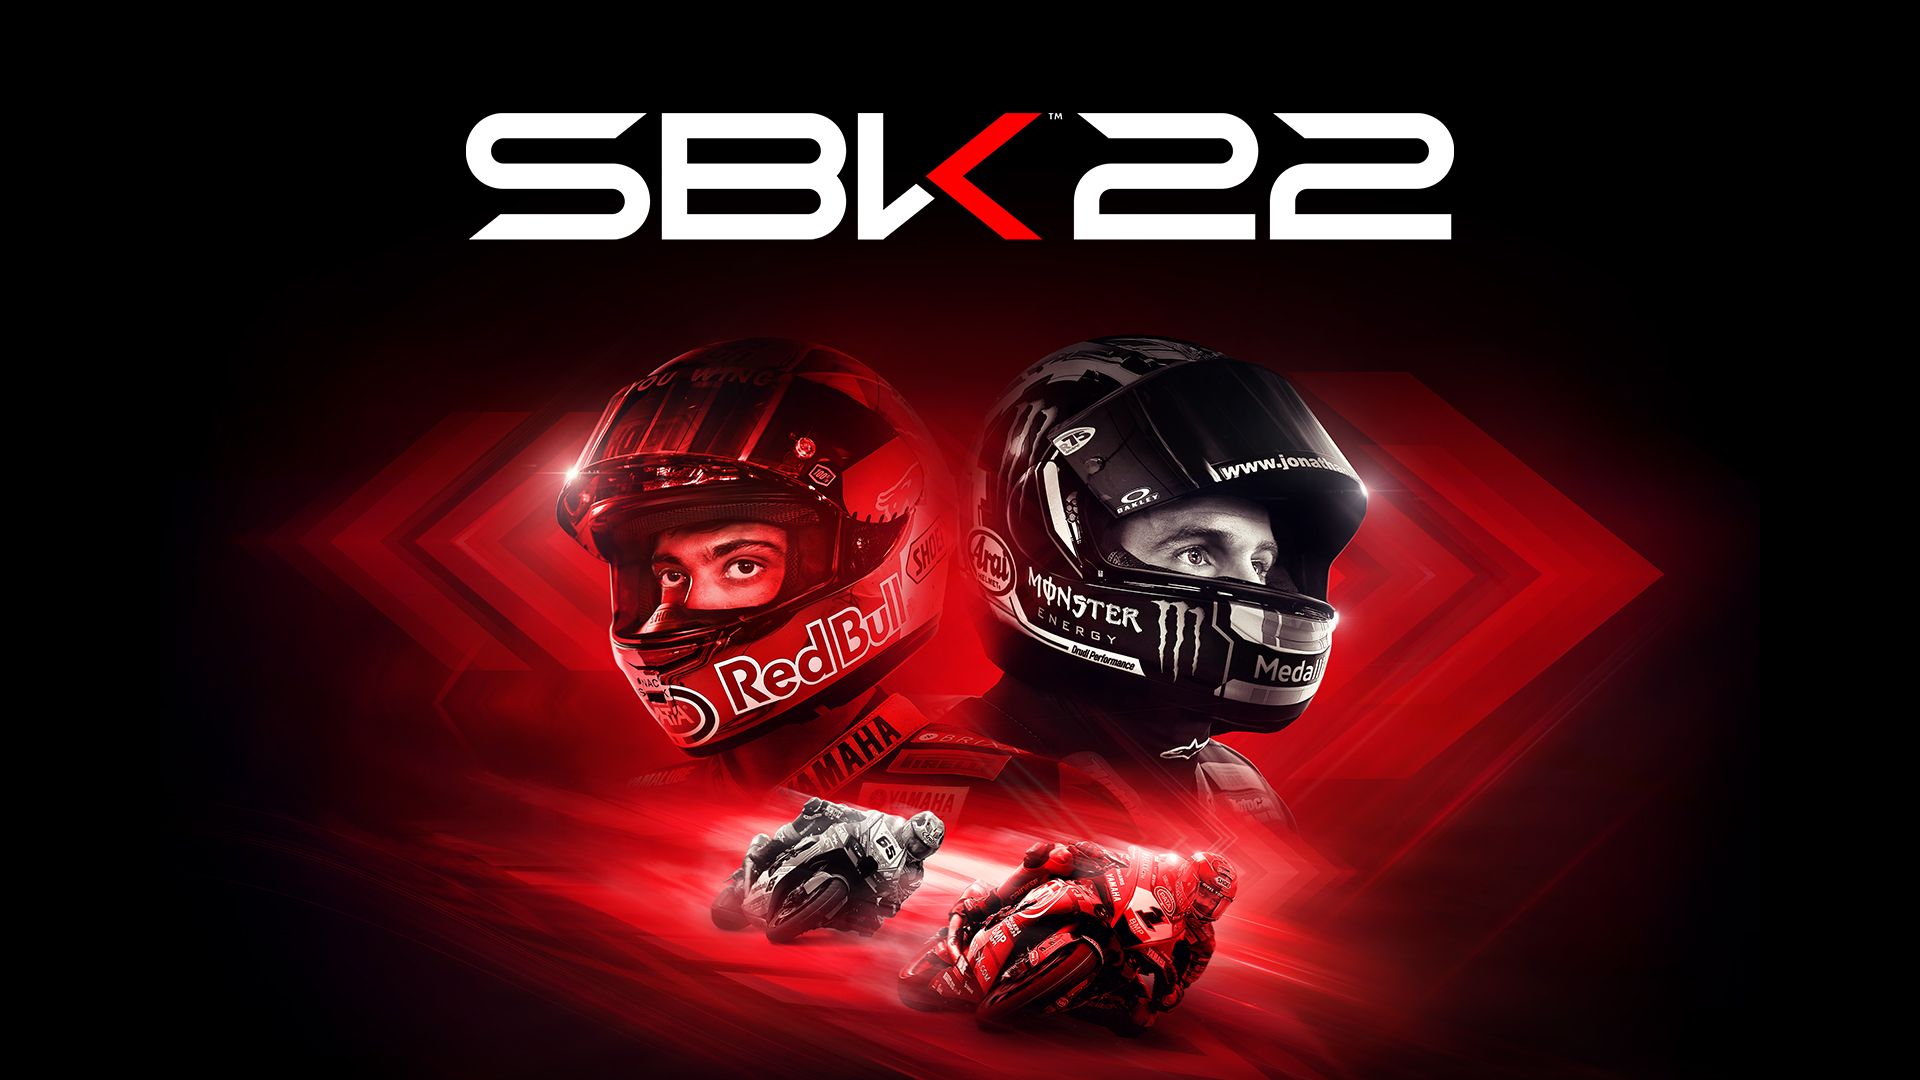 Video For A 10-Year Wait: The Excitement of the Superbike World Championship Returns with SBK22